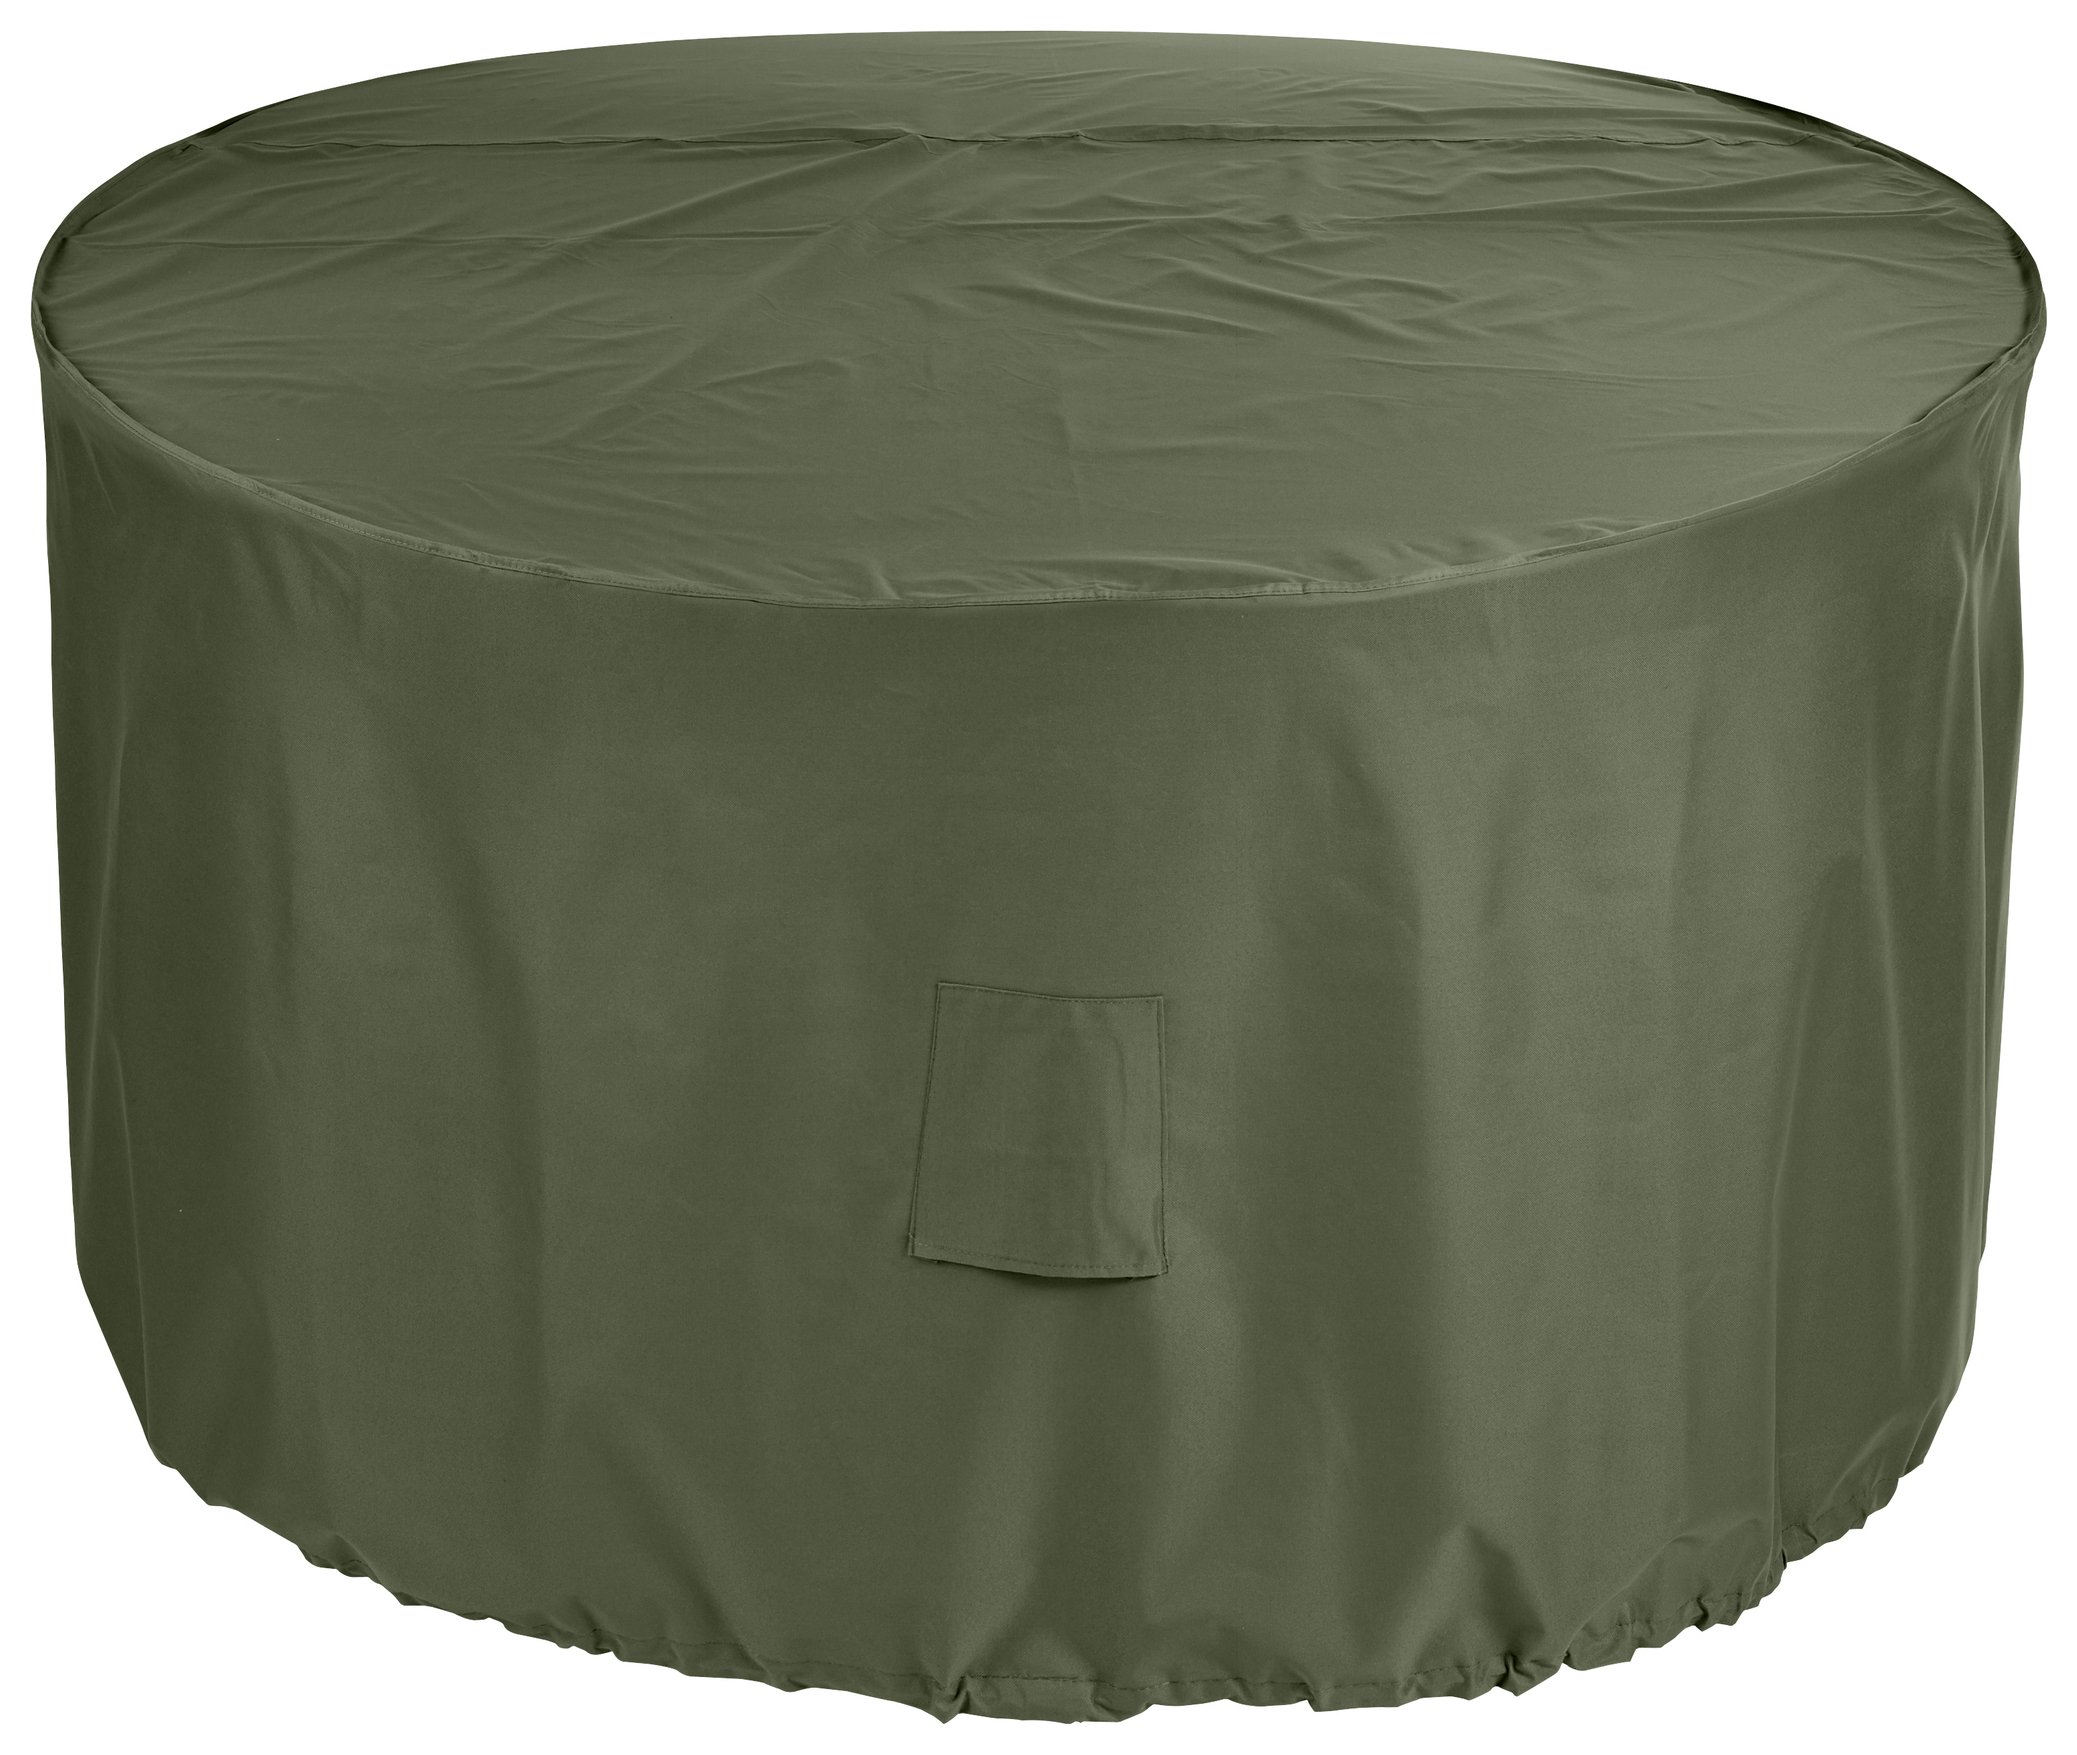 Gardman 4 to 6 Seater Round Table Cover - Green